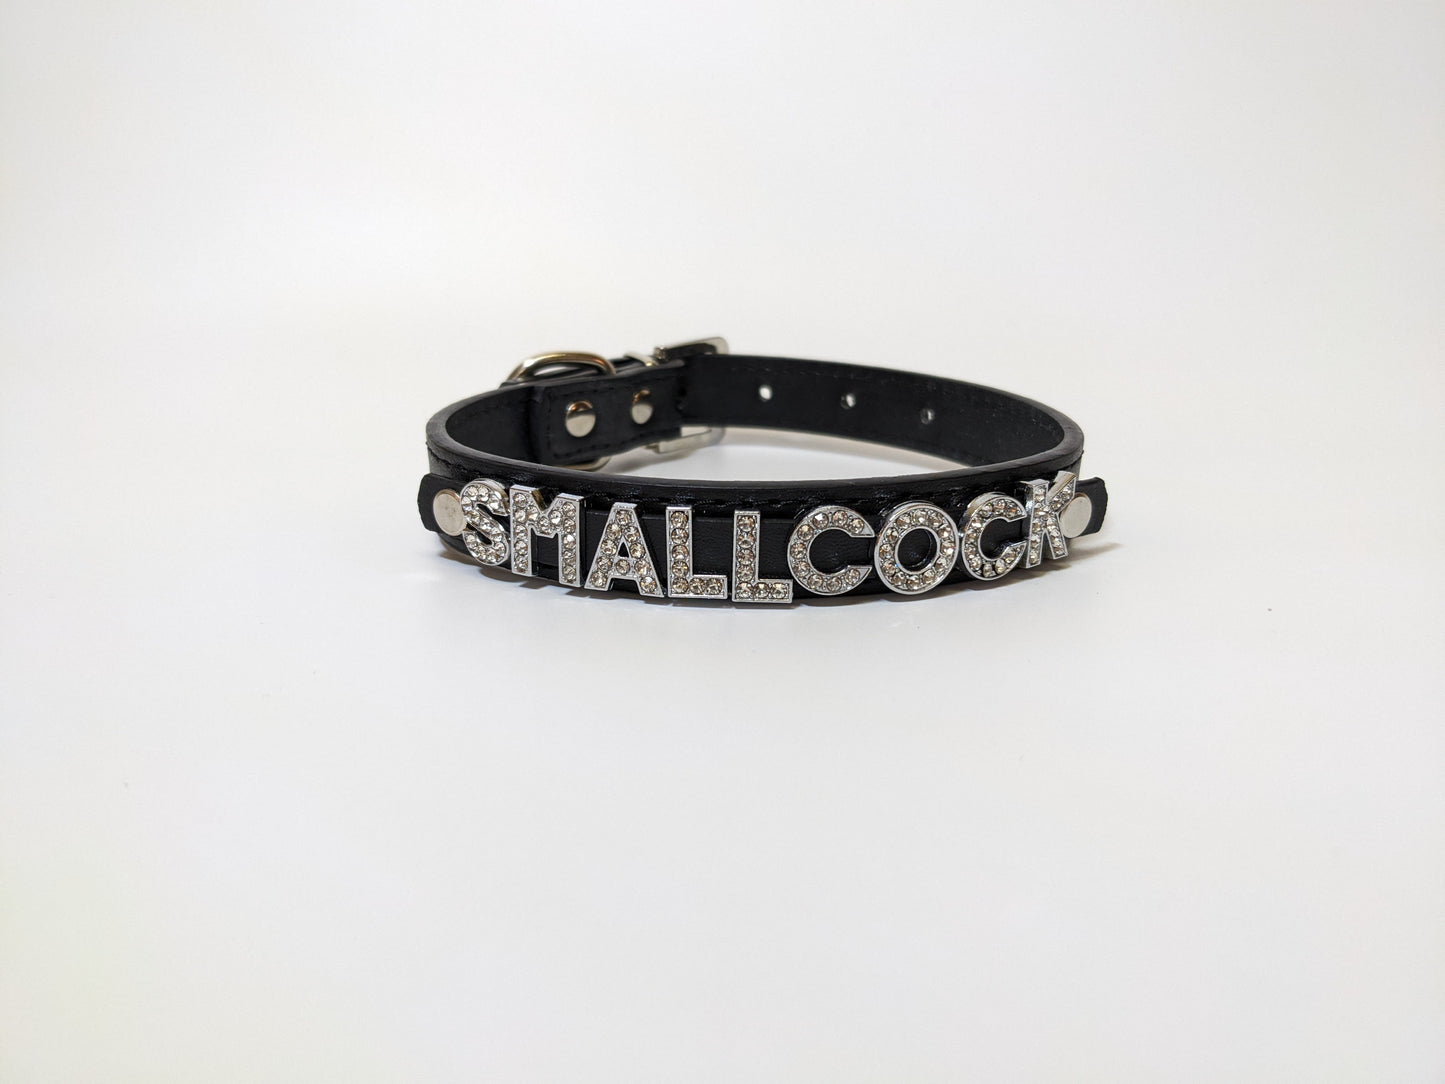 Small Cock Collar for sph kink